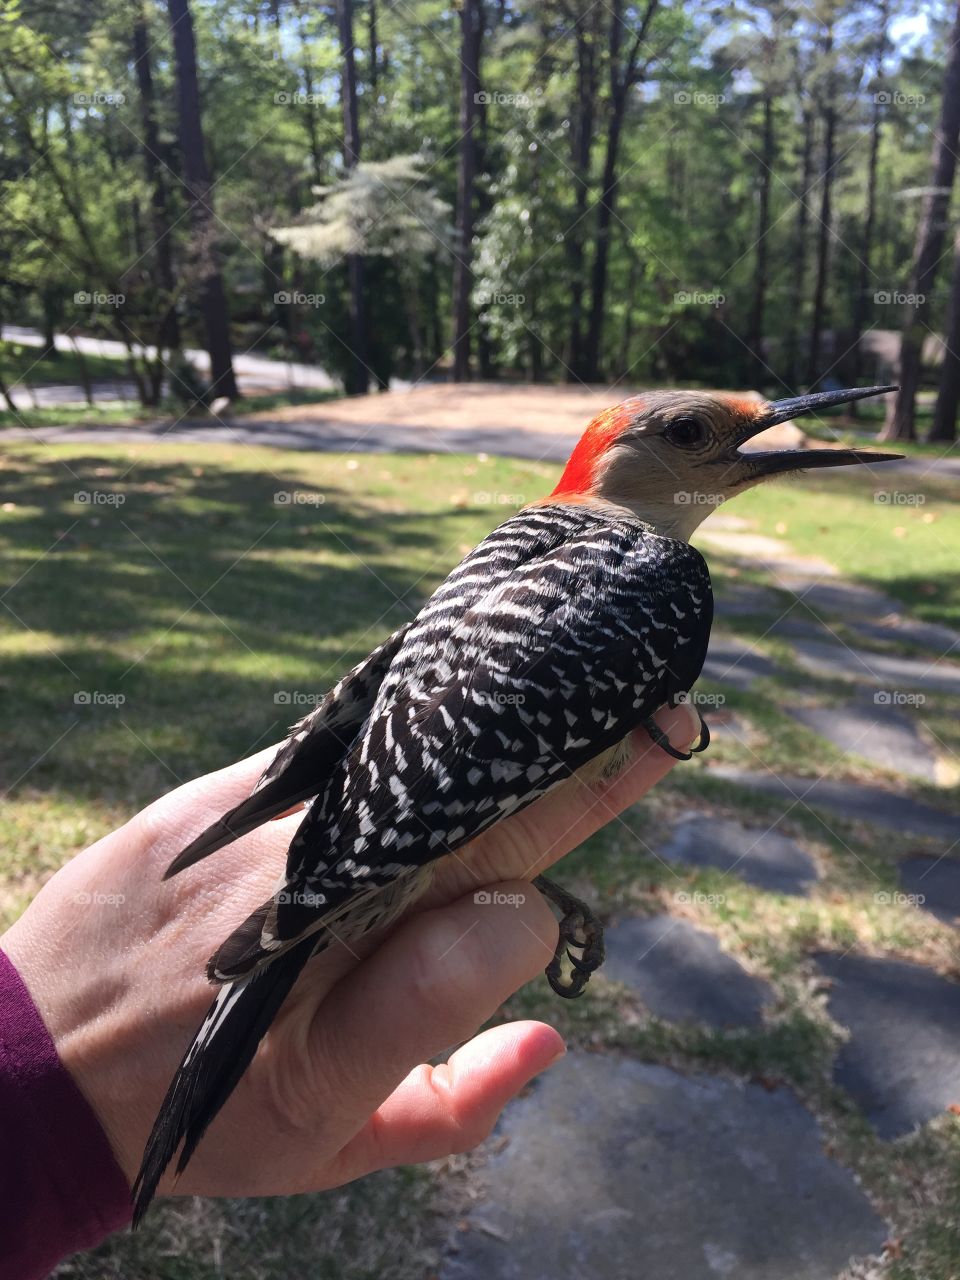 Saved a woodpecker that flew into my window. He was totally stunned but no wings were hurt. So I held him till he caught his breath and flew off. 